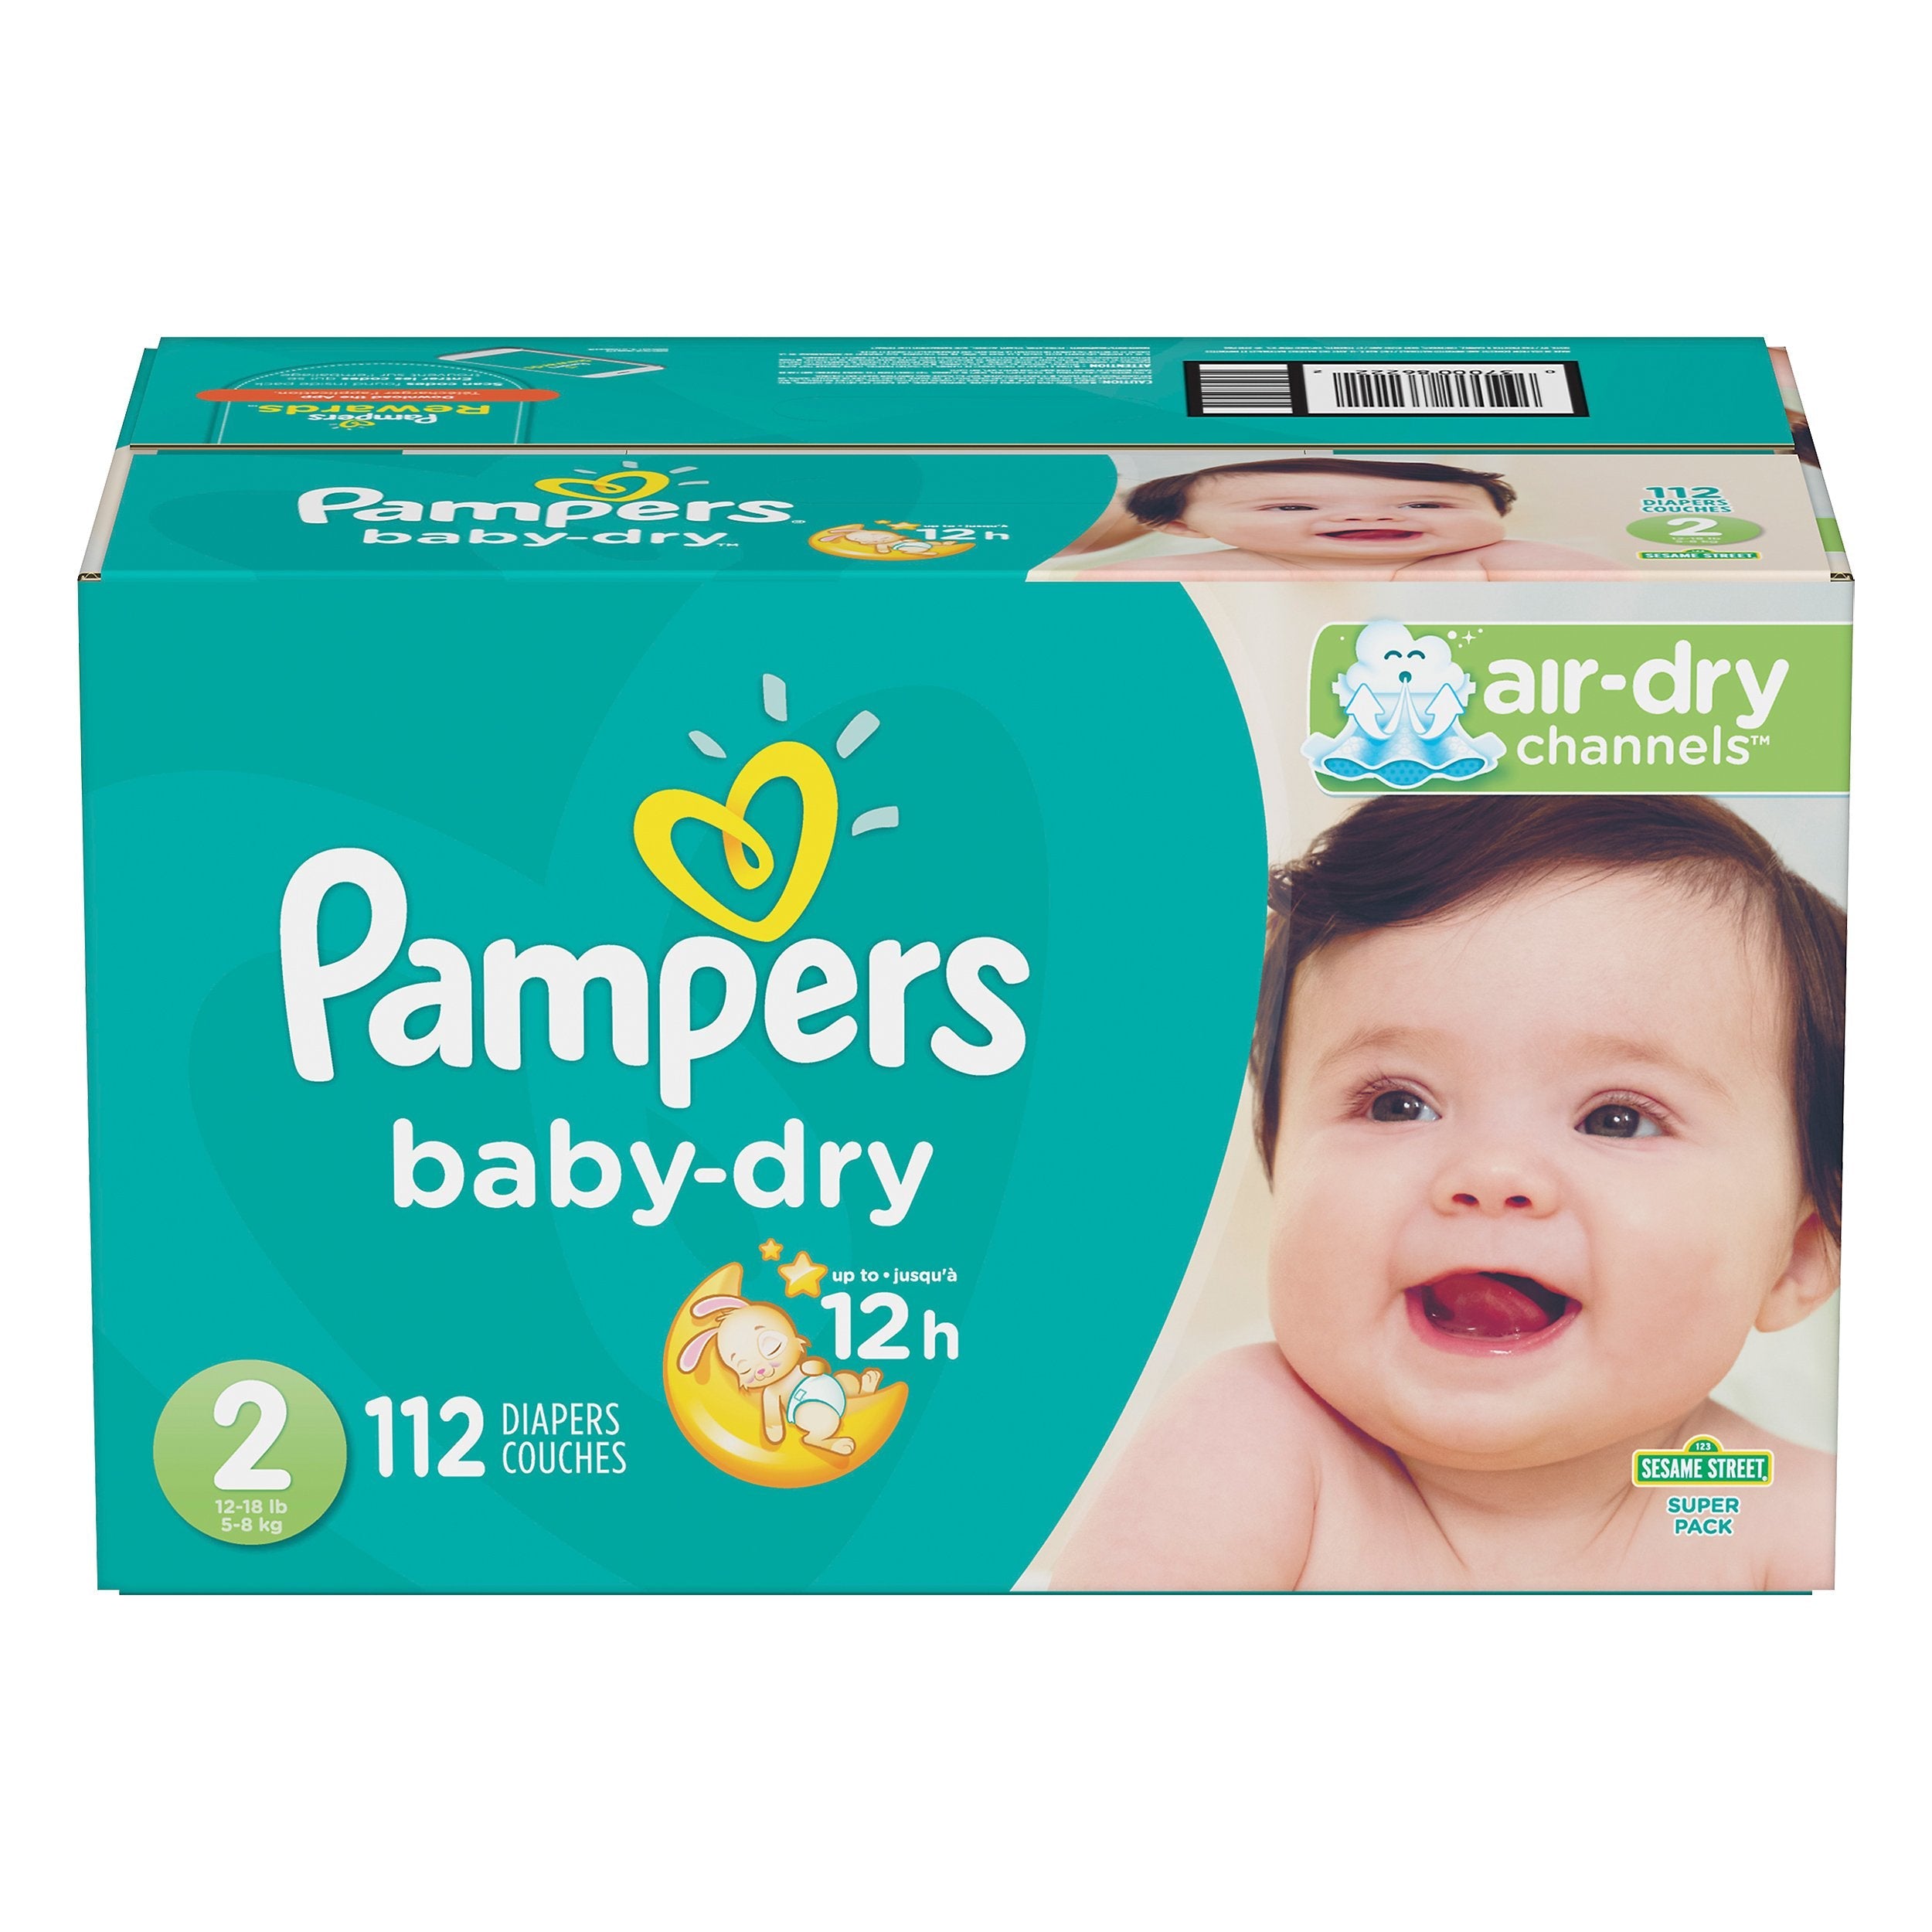 norway pampers informtion